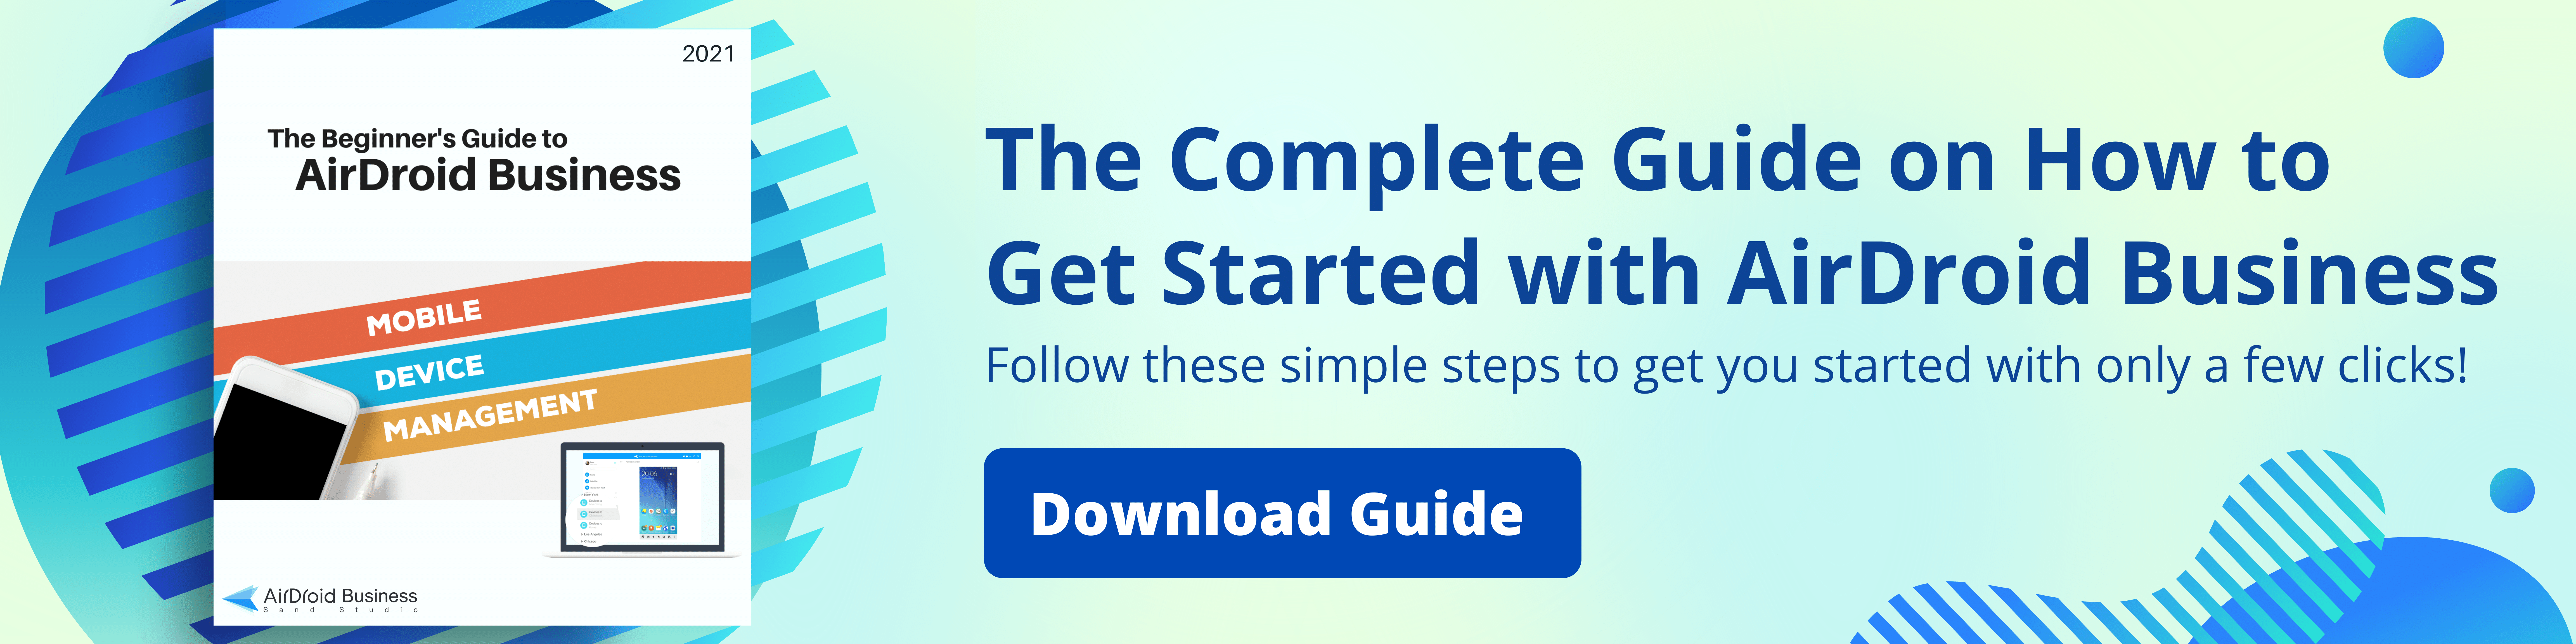 ams-how_to_get_started-ebook_banner.png